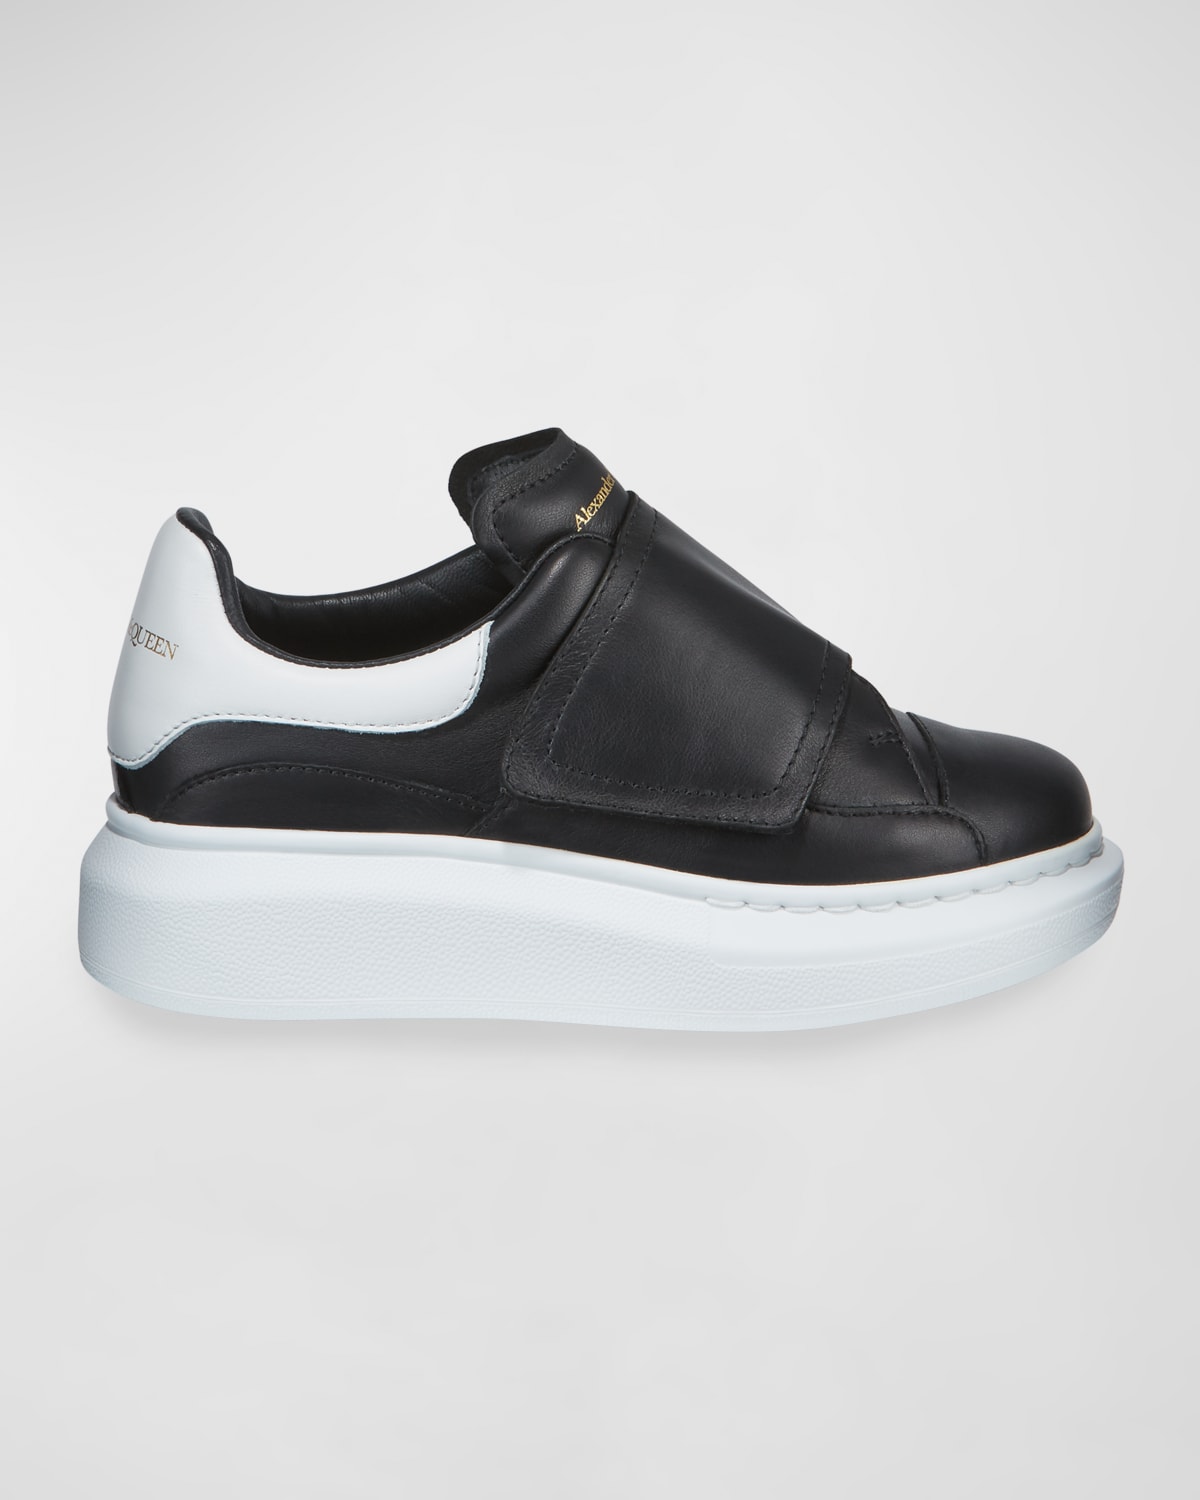 Oversized Grip-Strap Leather Sneakers, Toddler/Kids